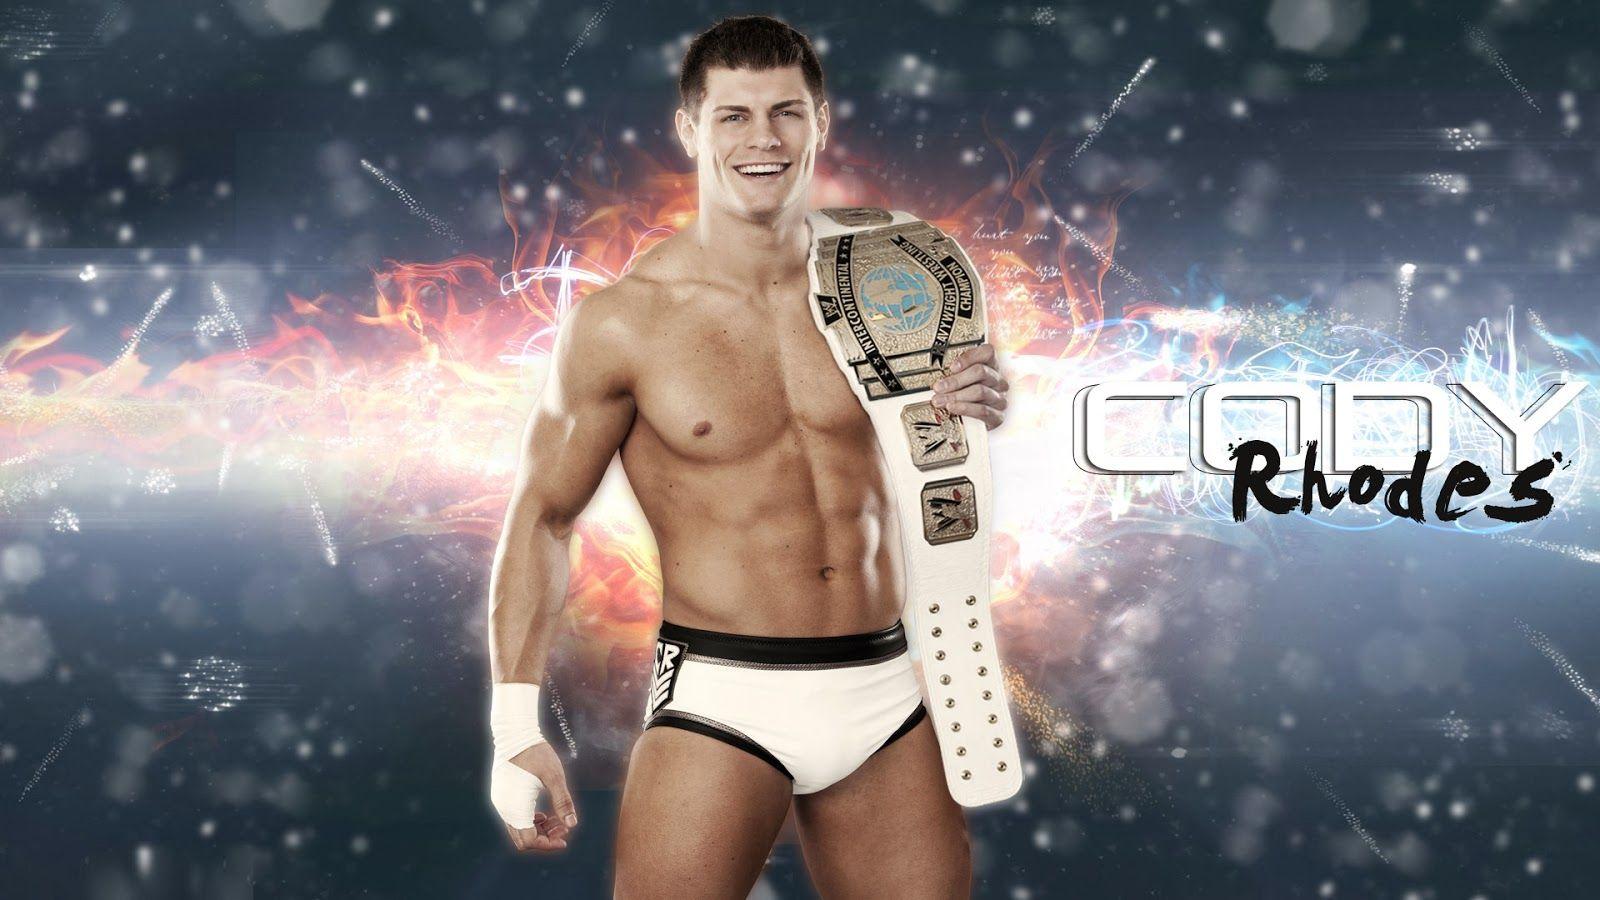 Cody Rhodes 2014 Wallpapers.